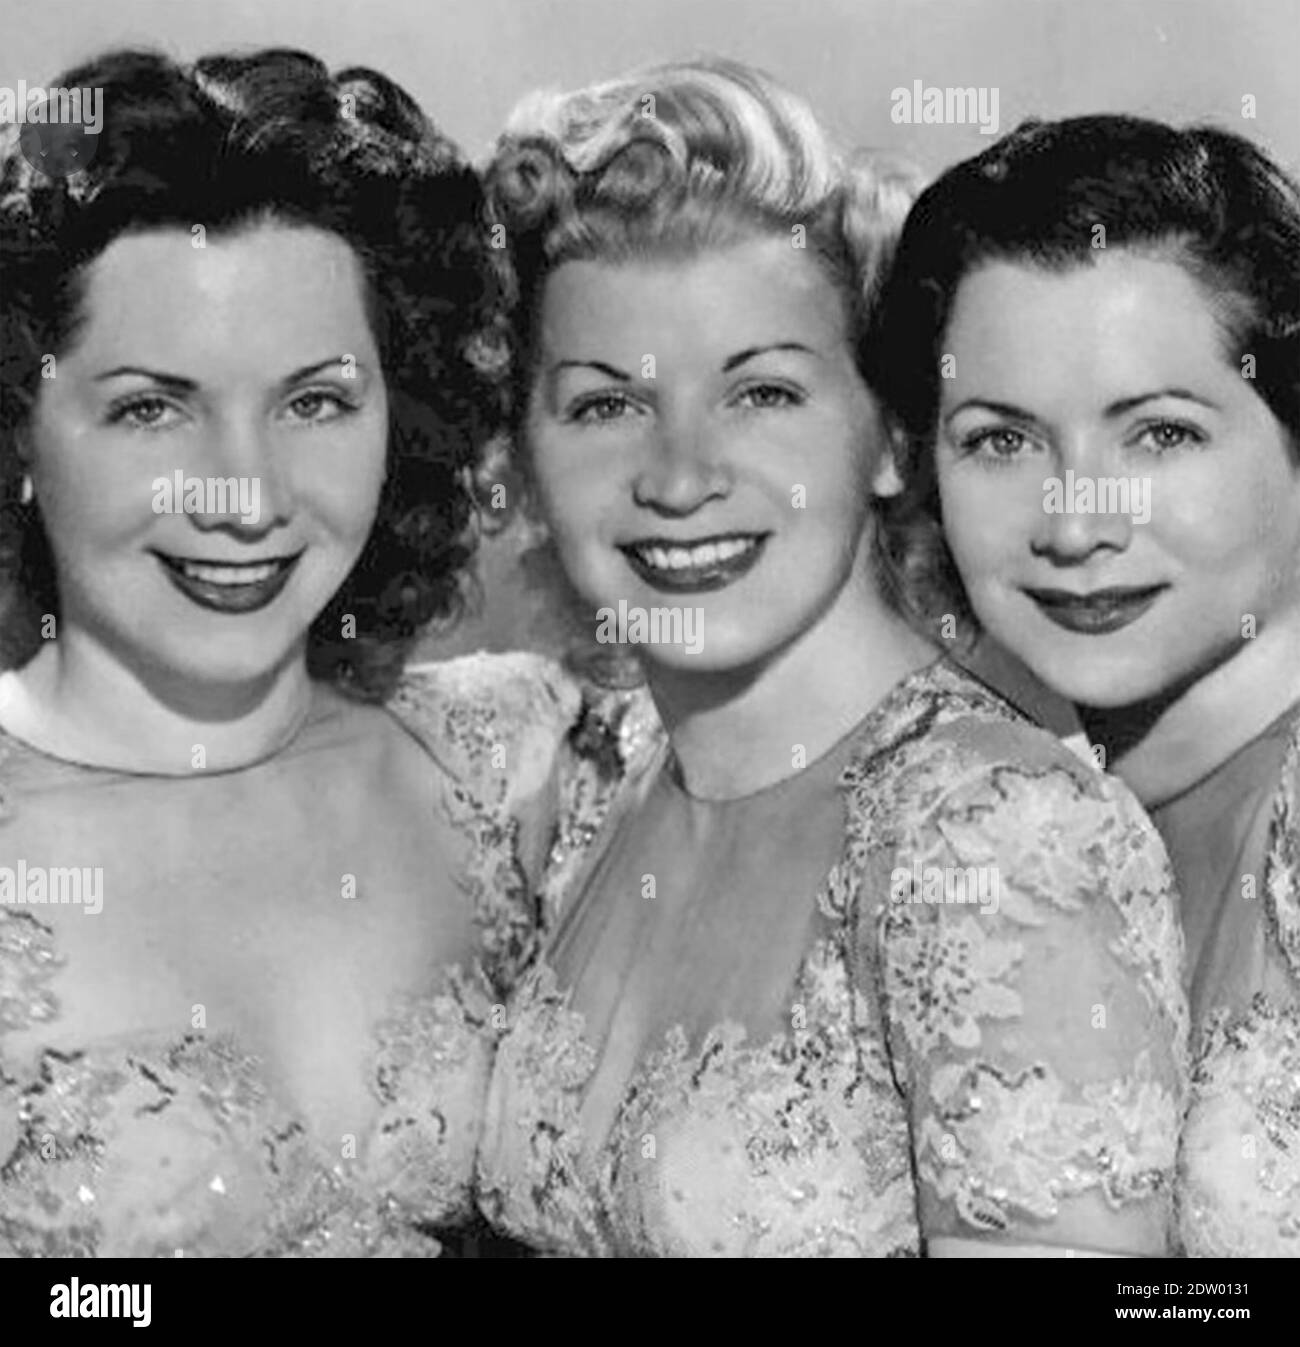 THE FONTANE SISTERS Promotional photo of American vocal group about 1955. From left: Geri, Marge, Bea. Their actual surname was Beale. Stock Photo